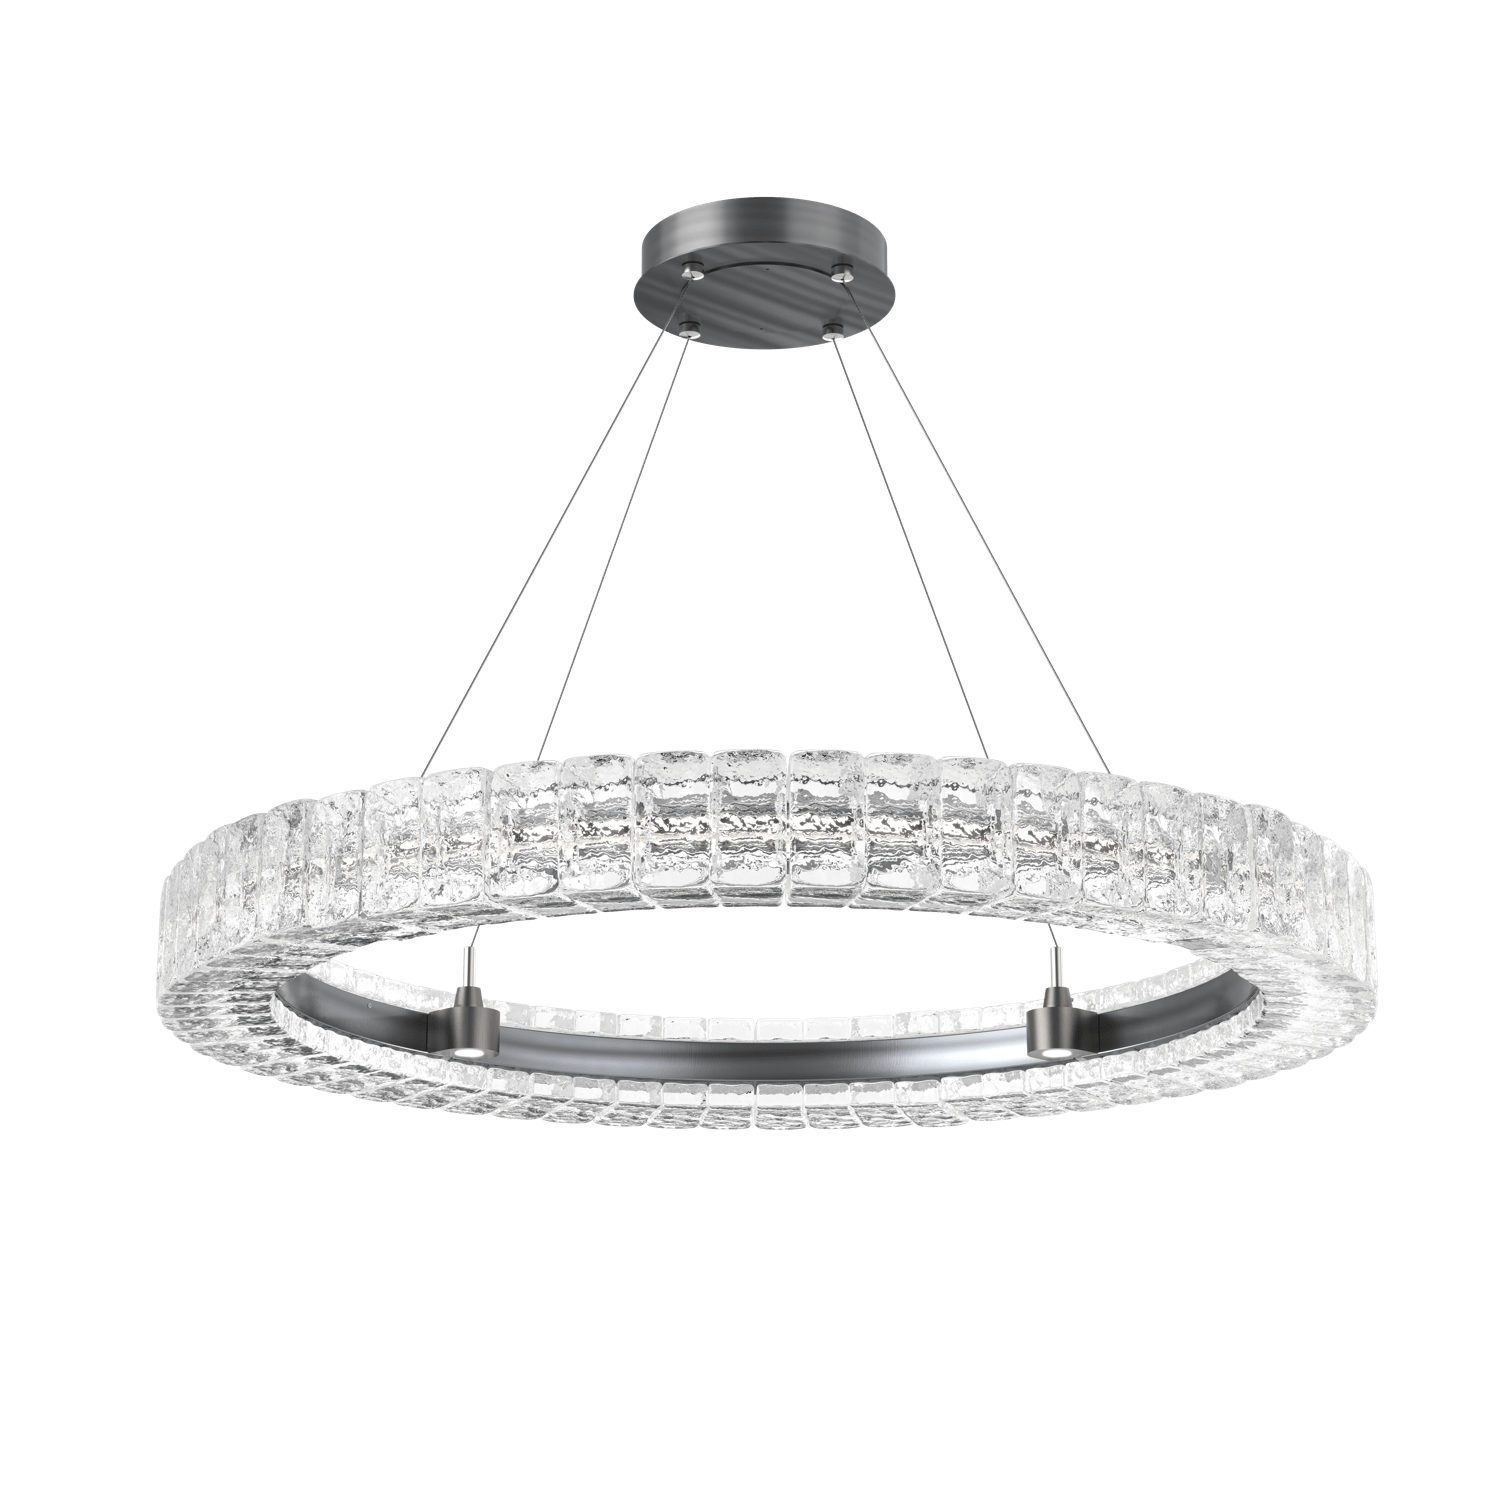 CHB0080-36-GM-Hammerton-Studio-Asscher-36-inch-ring-chandelier-with-gunmetal-finish-and-clear-cast-glass-shades-and-LED-lamping